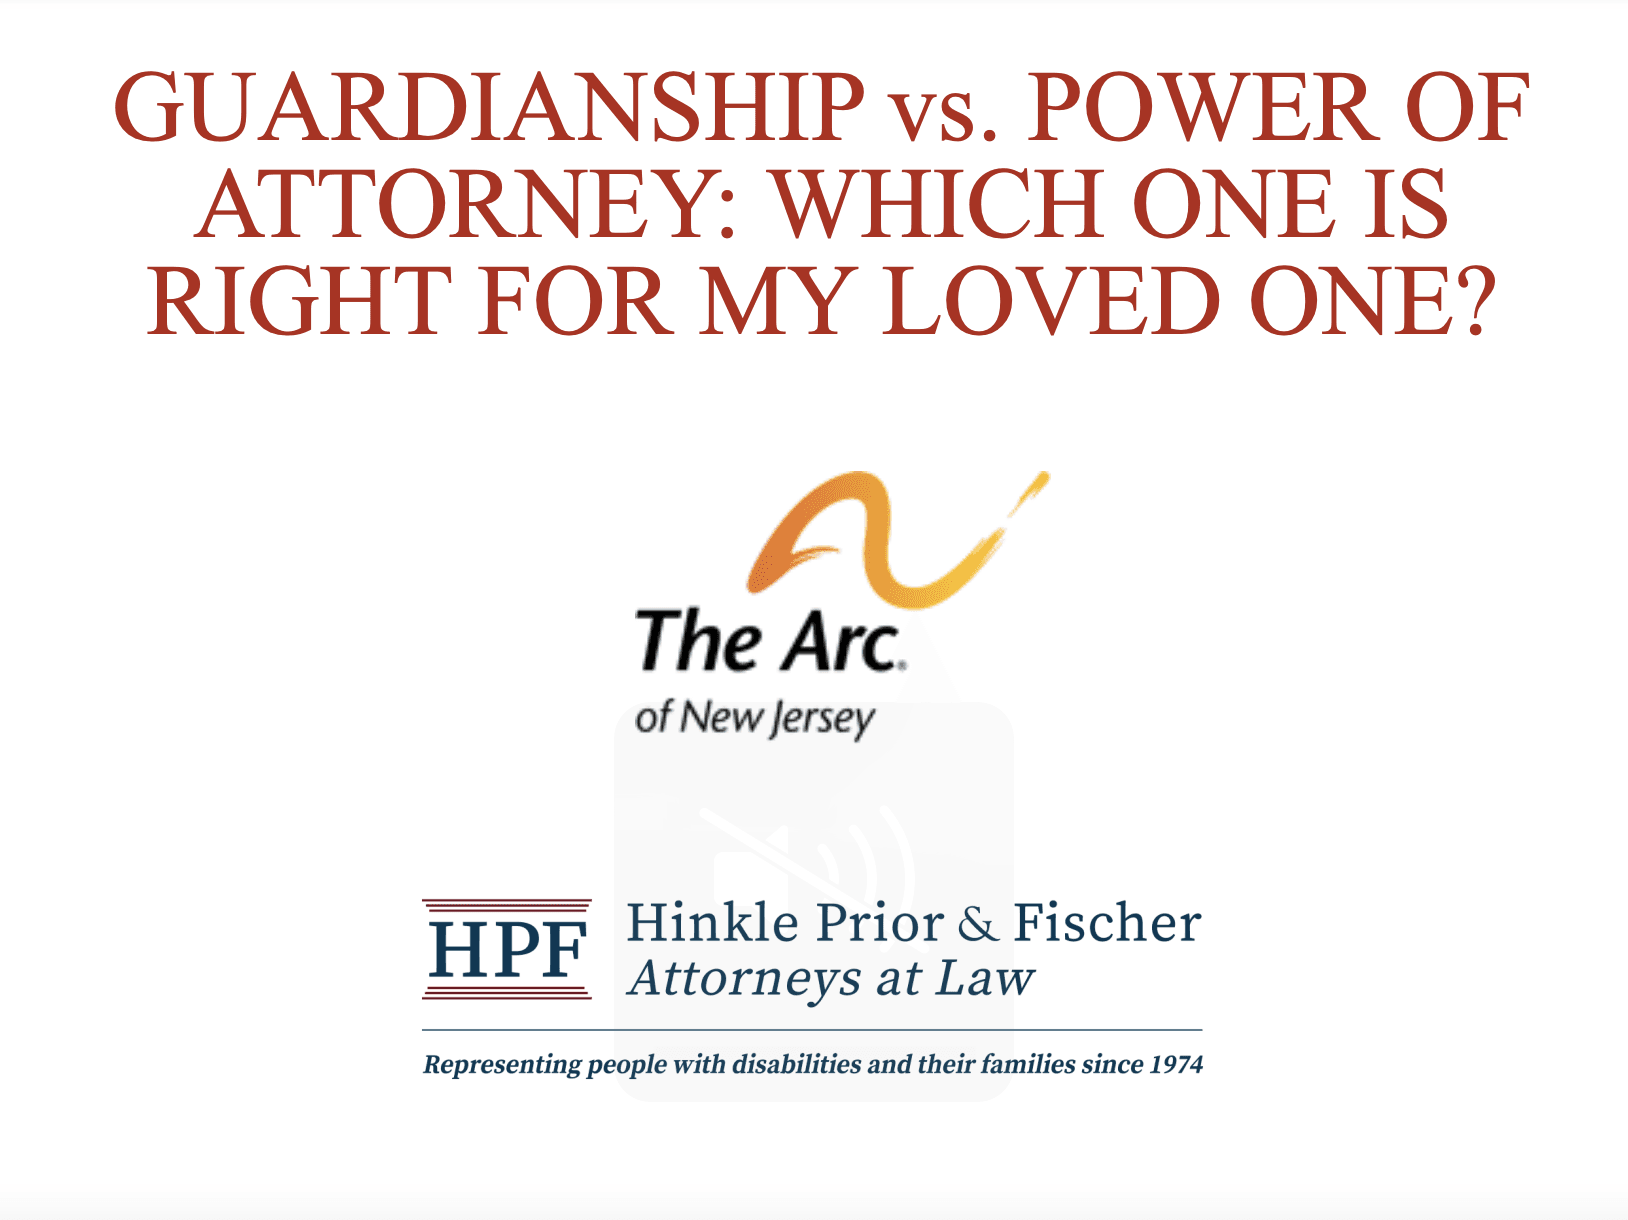 Guardianship vs. Power of Attorney: Which One is Right for Your Loved One with IDD